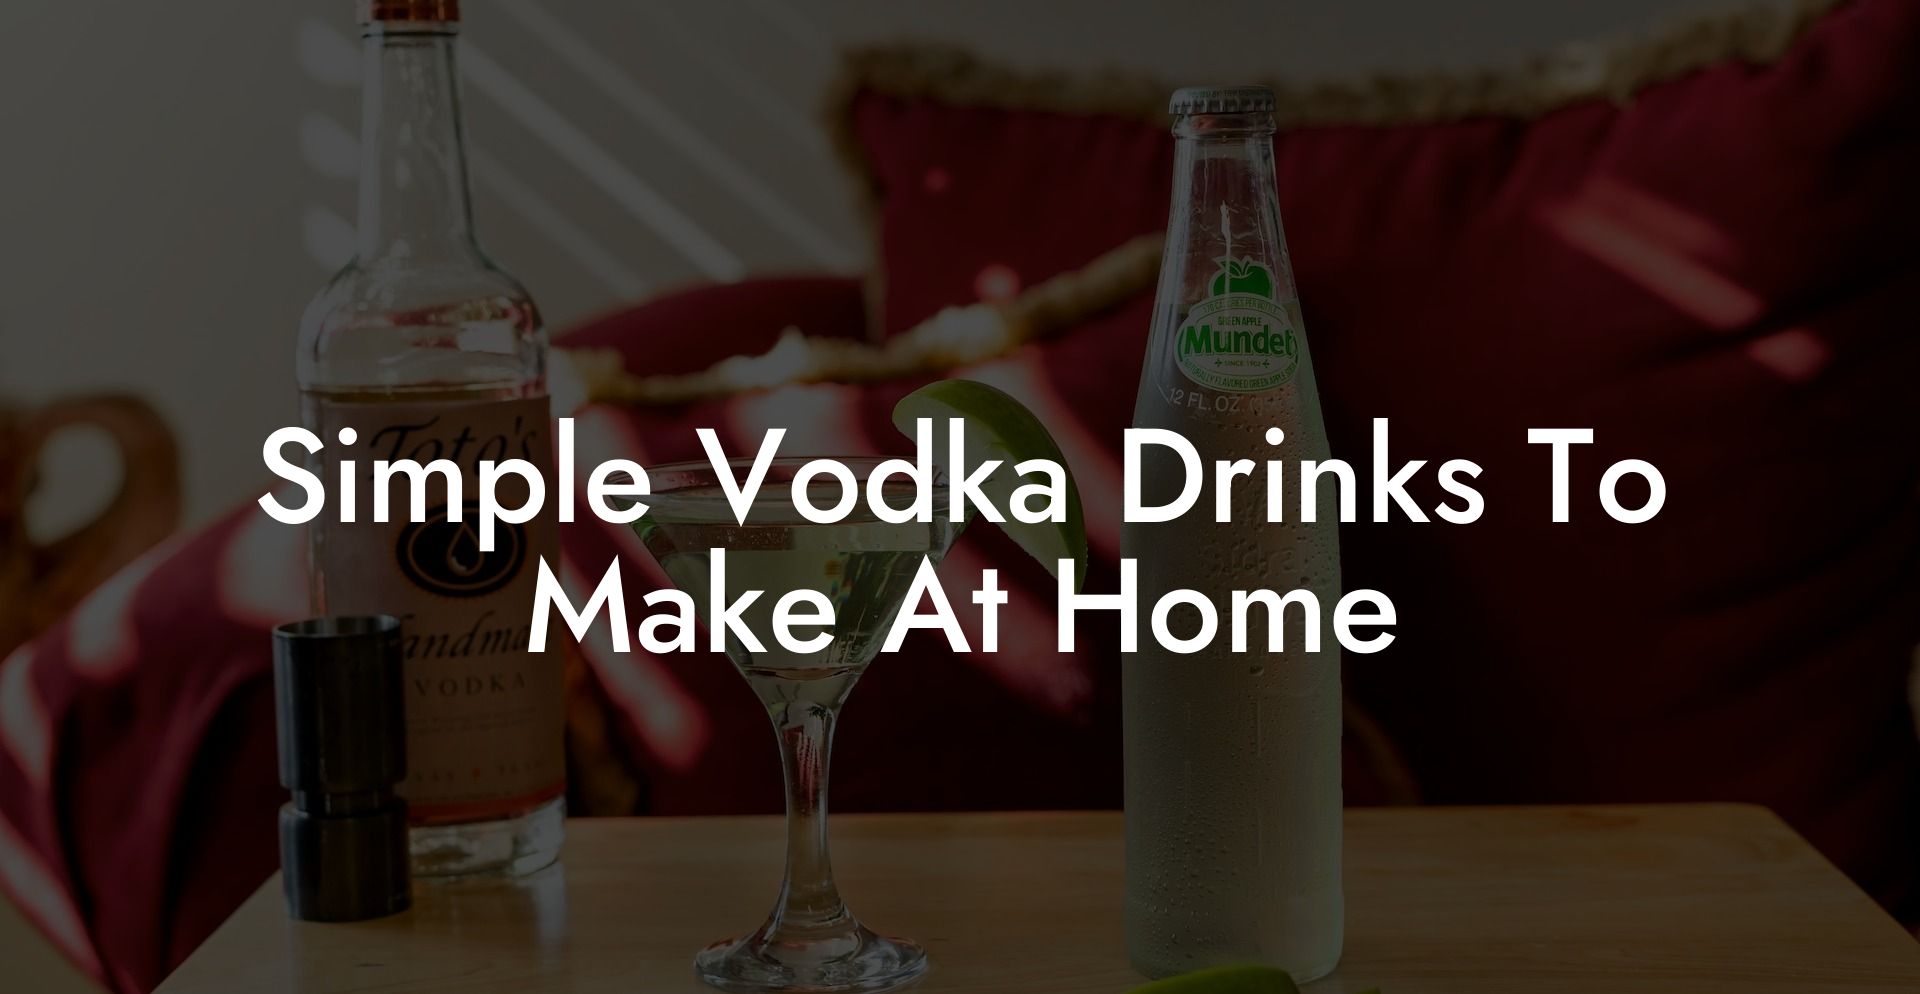 Simple Vodka Drinks To Make At Home